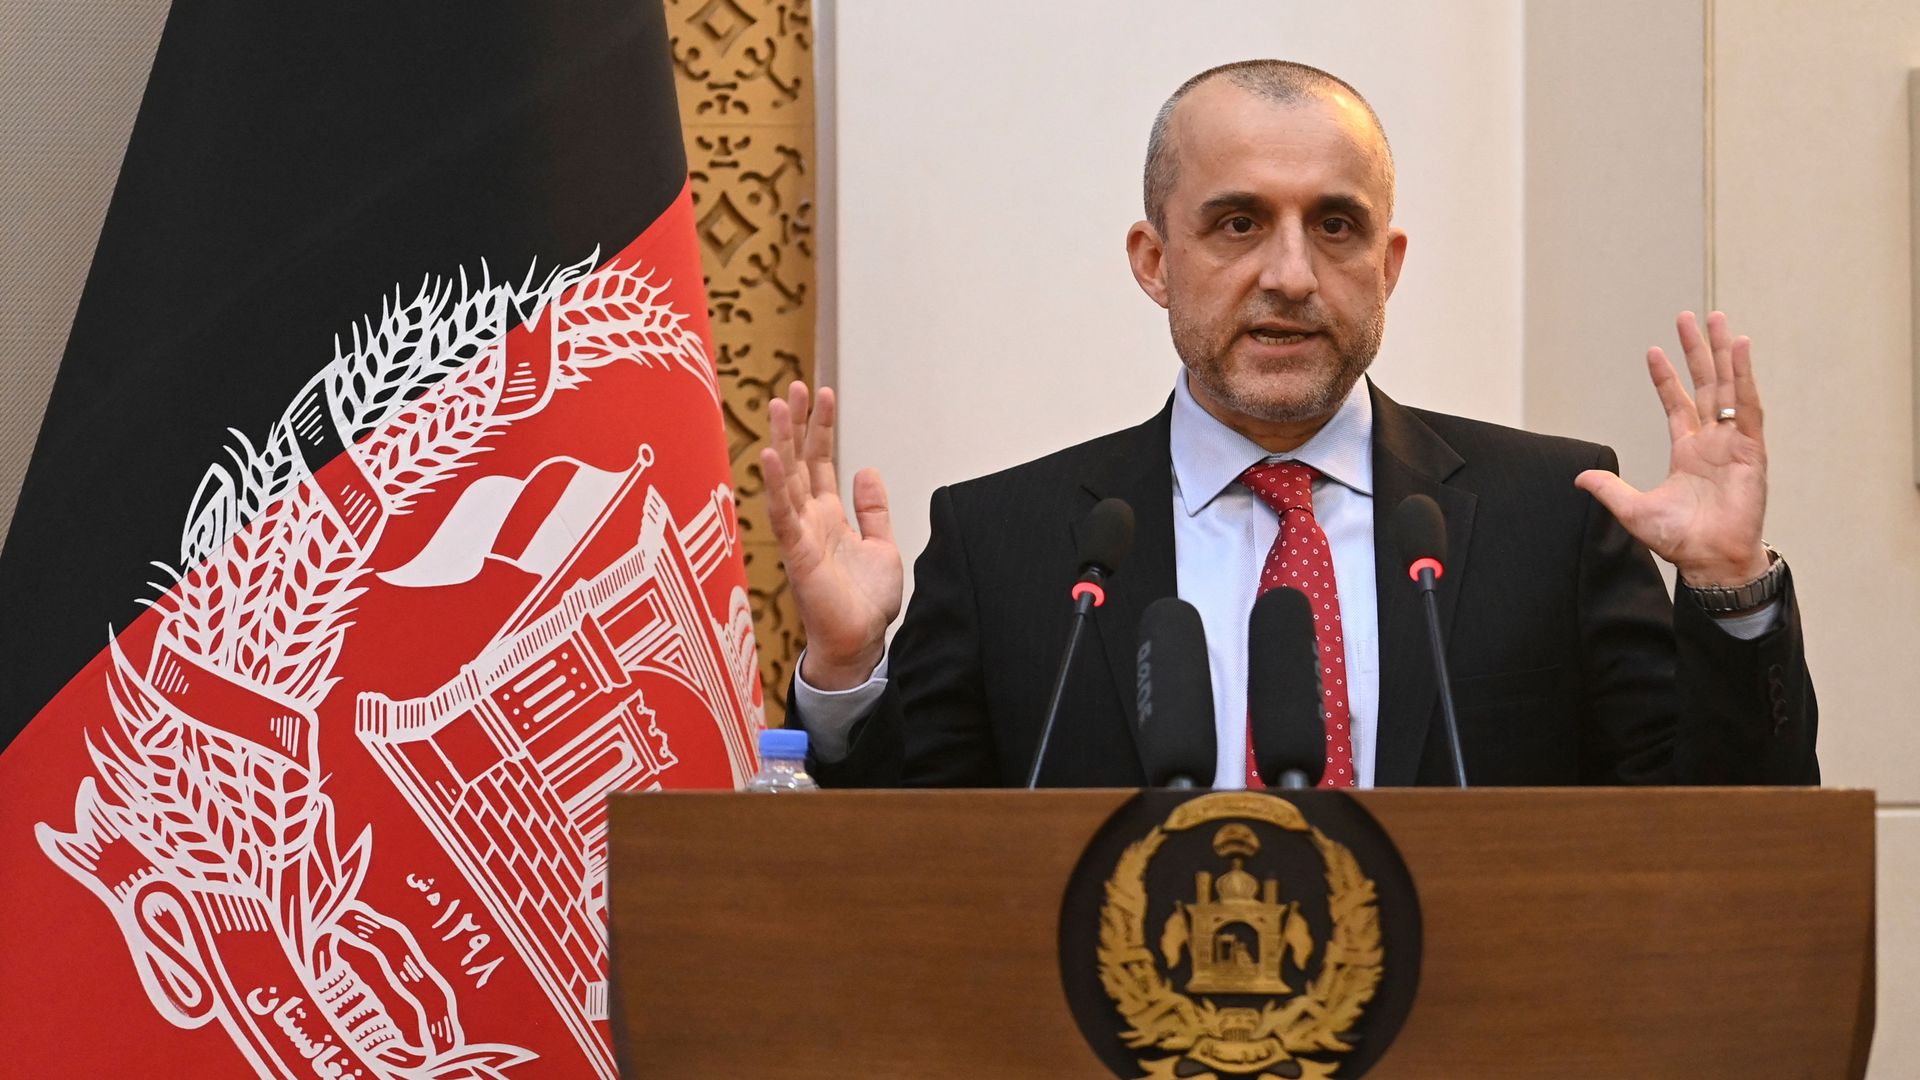 Vice President of Afghanistan Amrullah Saleh speaks during a function at the Afghan presidential palace in Kabul on August 4